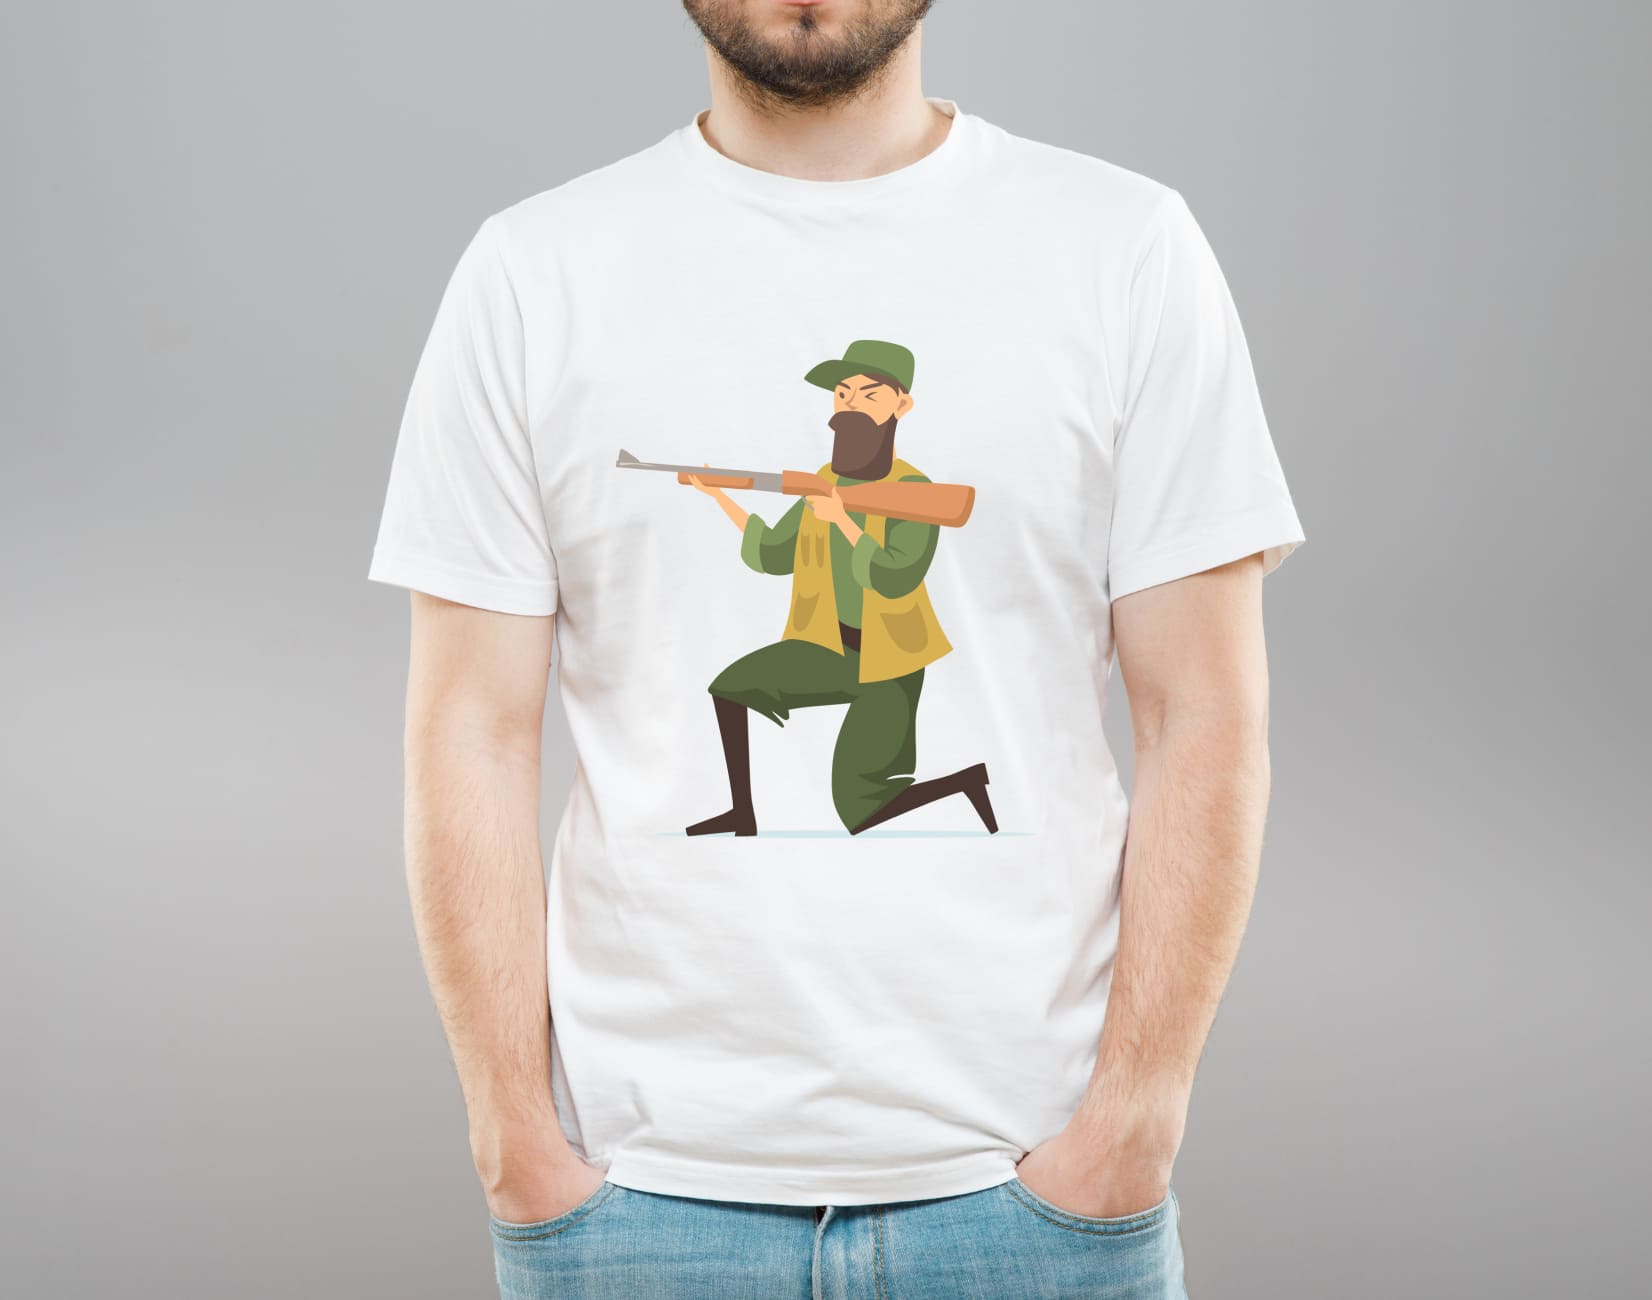 Image of a white t-shirt with a colorful duck hunter print.